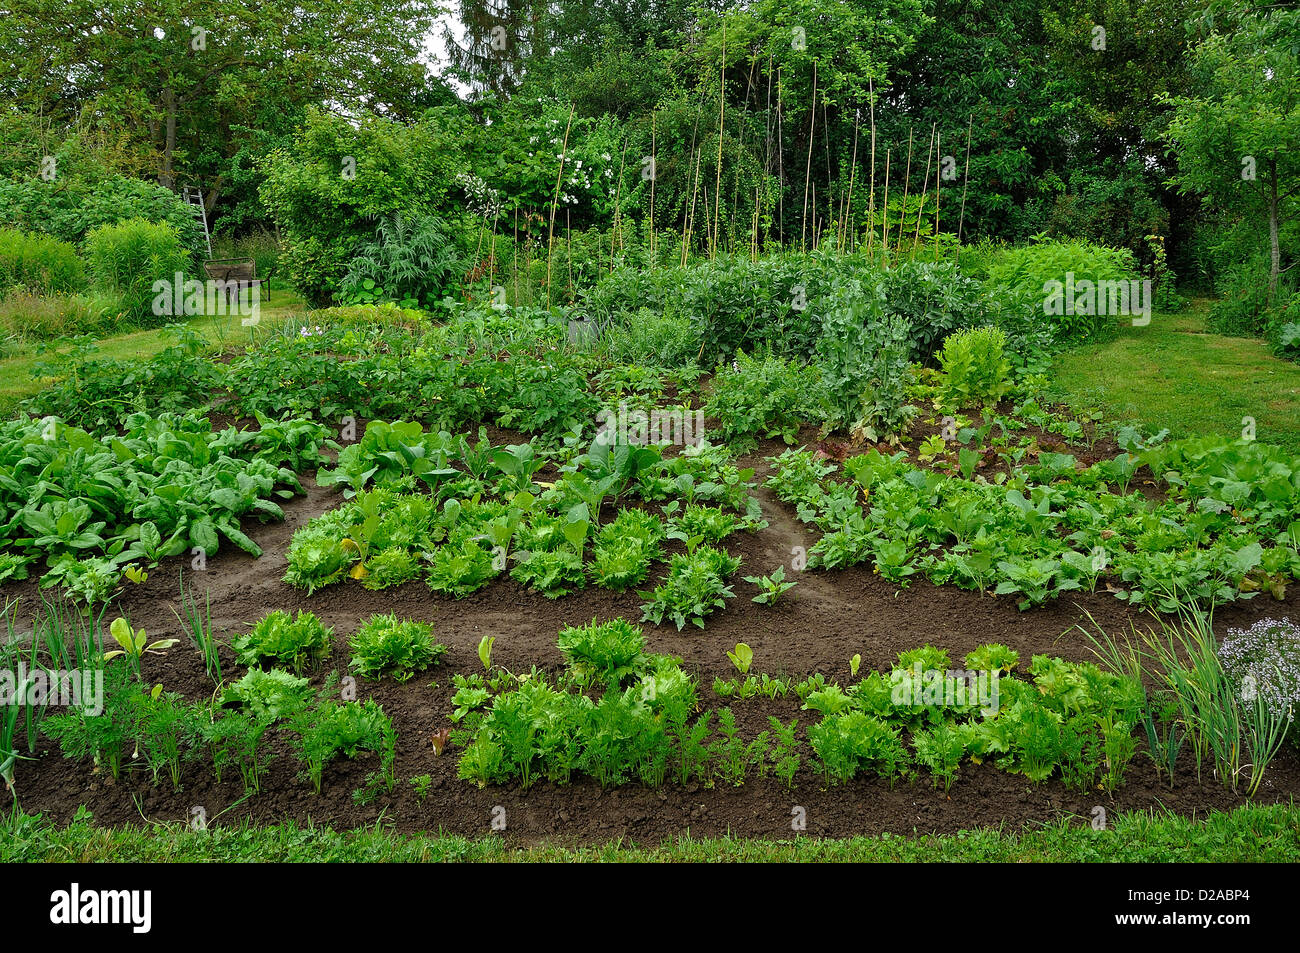 Vegetables plots: carrots and lettuce,spinach, lettuce and Milan cabbage, potatoe, broad beans. Stock Photo